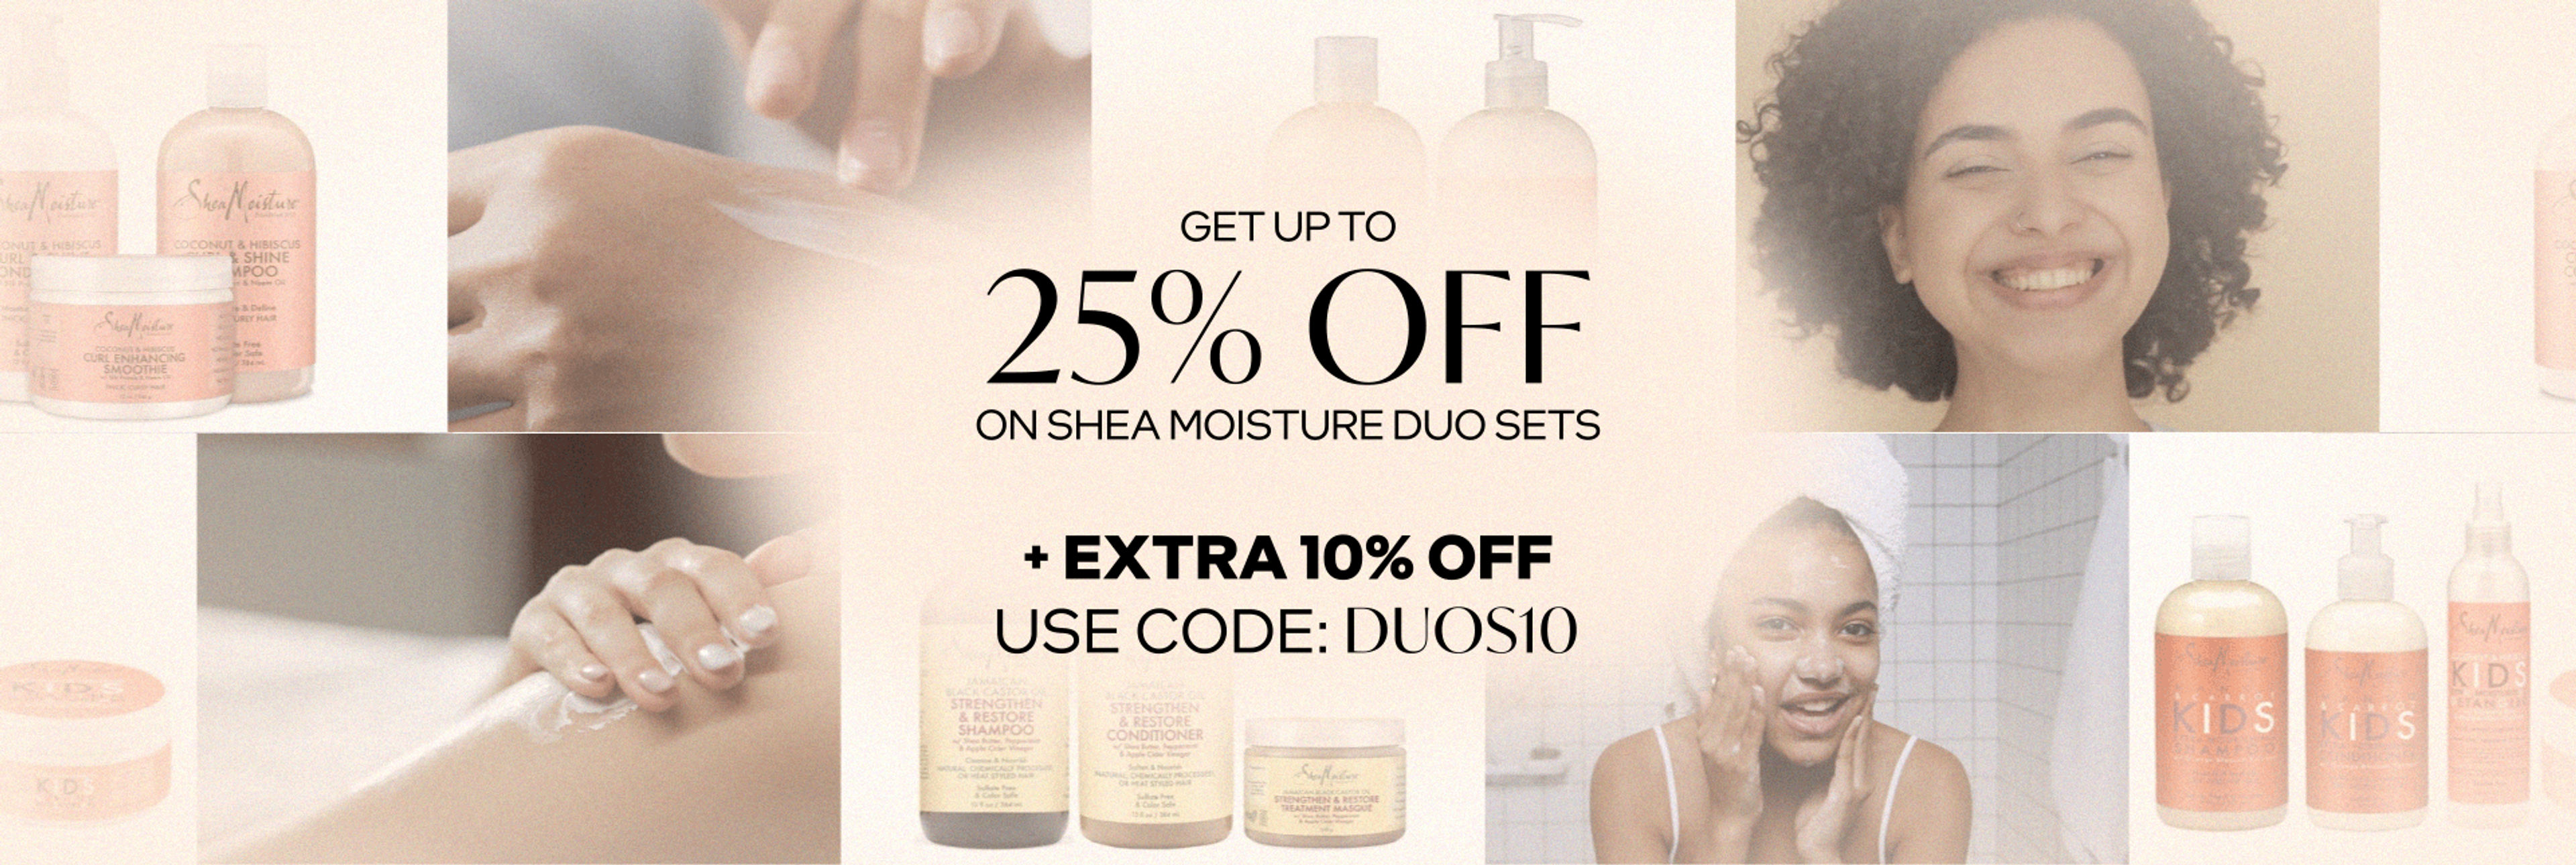 Get Up to 25% off on Shea Moisture Duo Sets + Extra 10% off by using code 